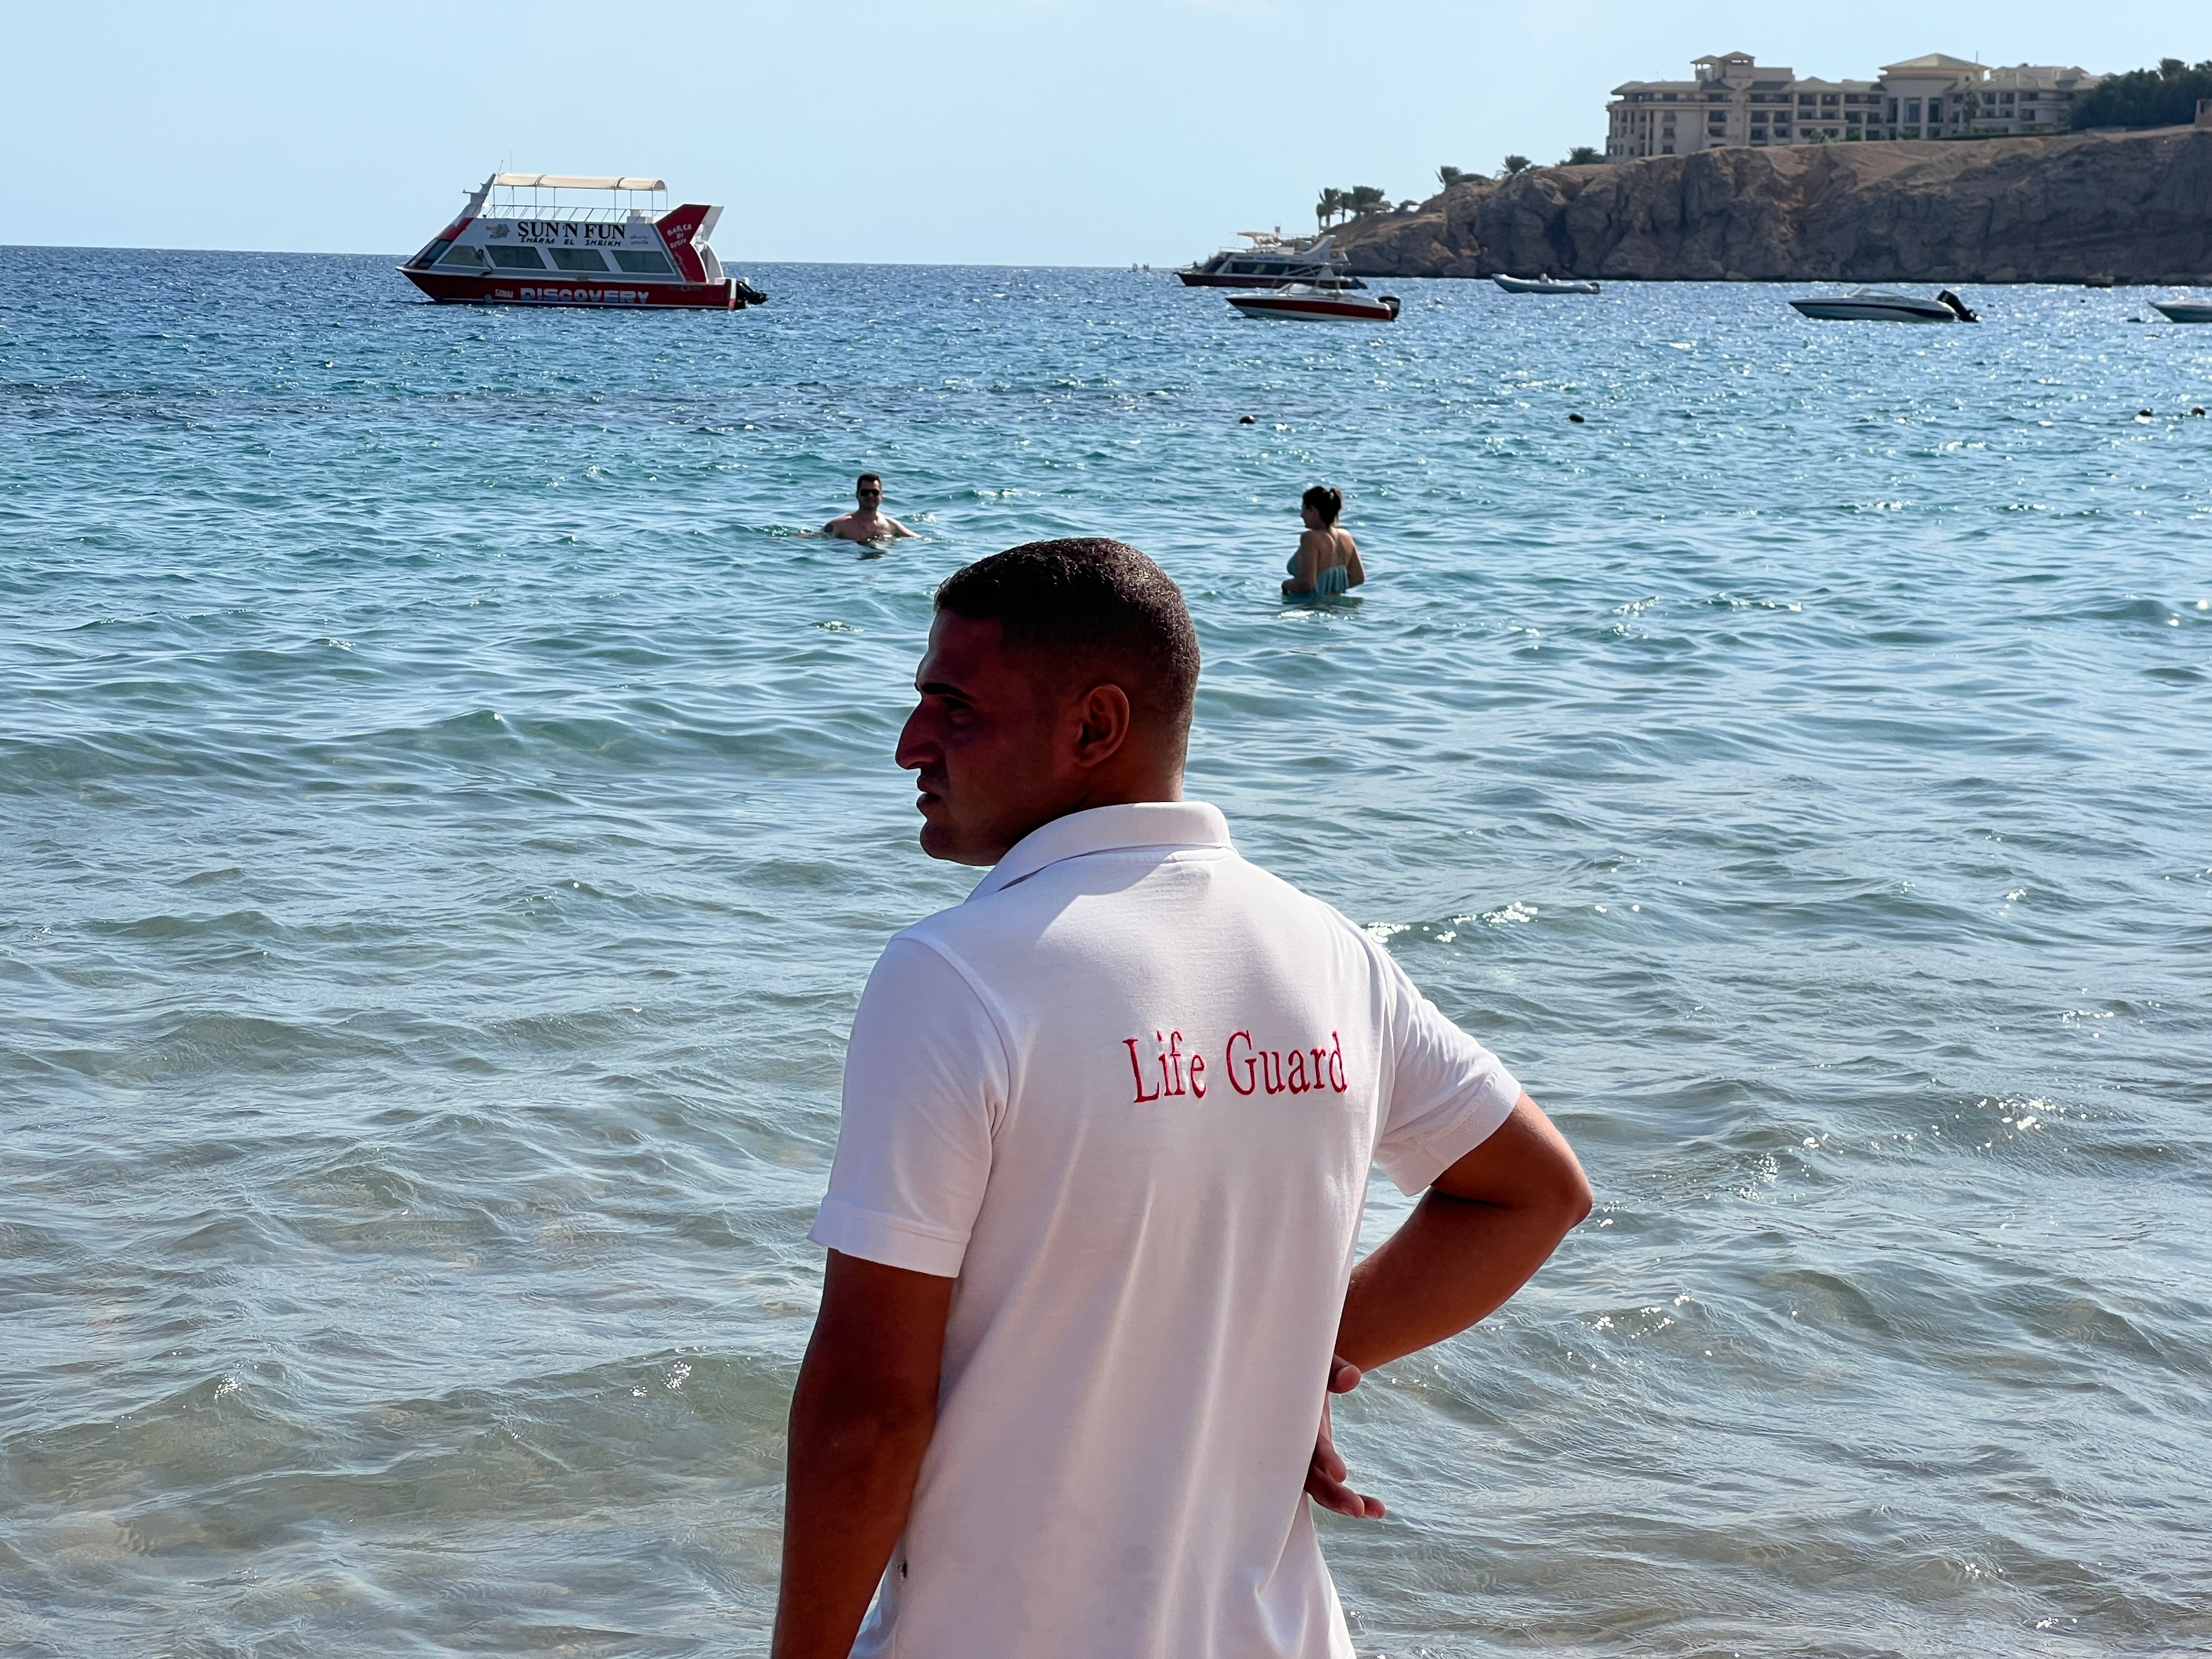 Sharm El-Sheikh feels safe with its substantial security presence